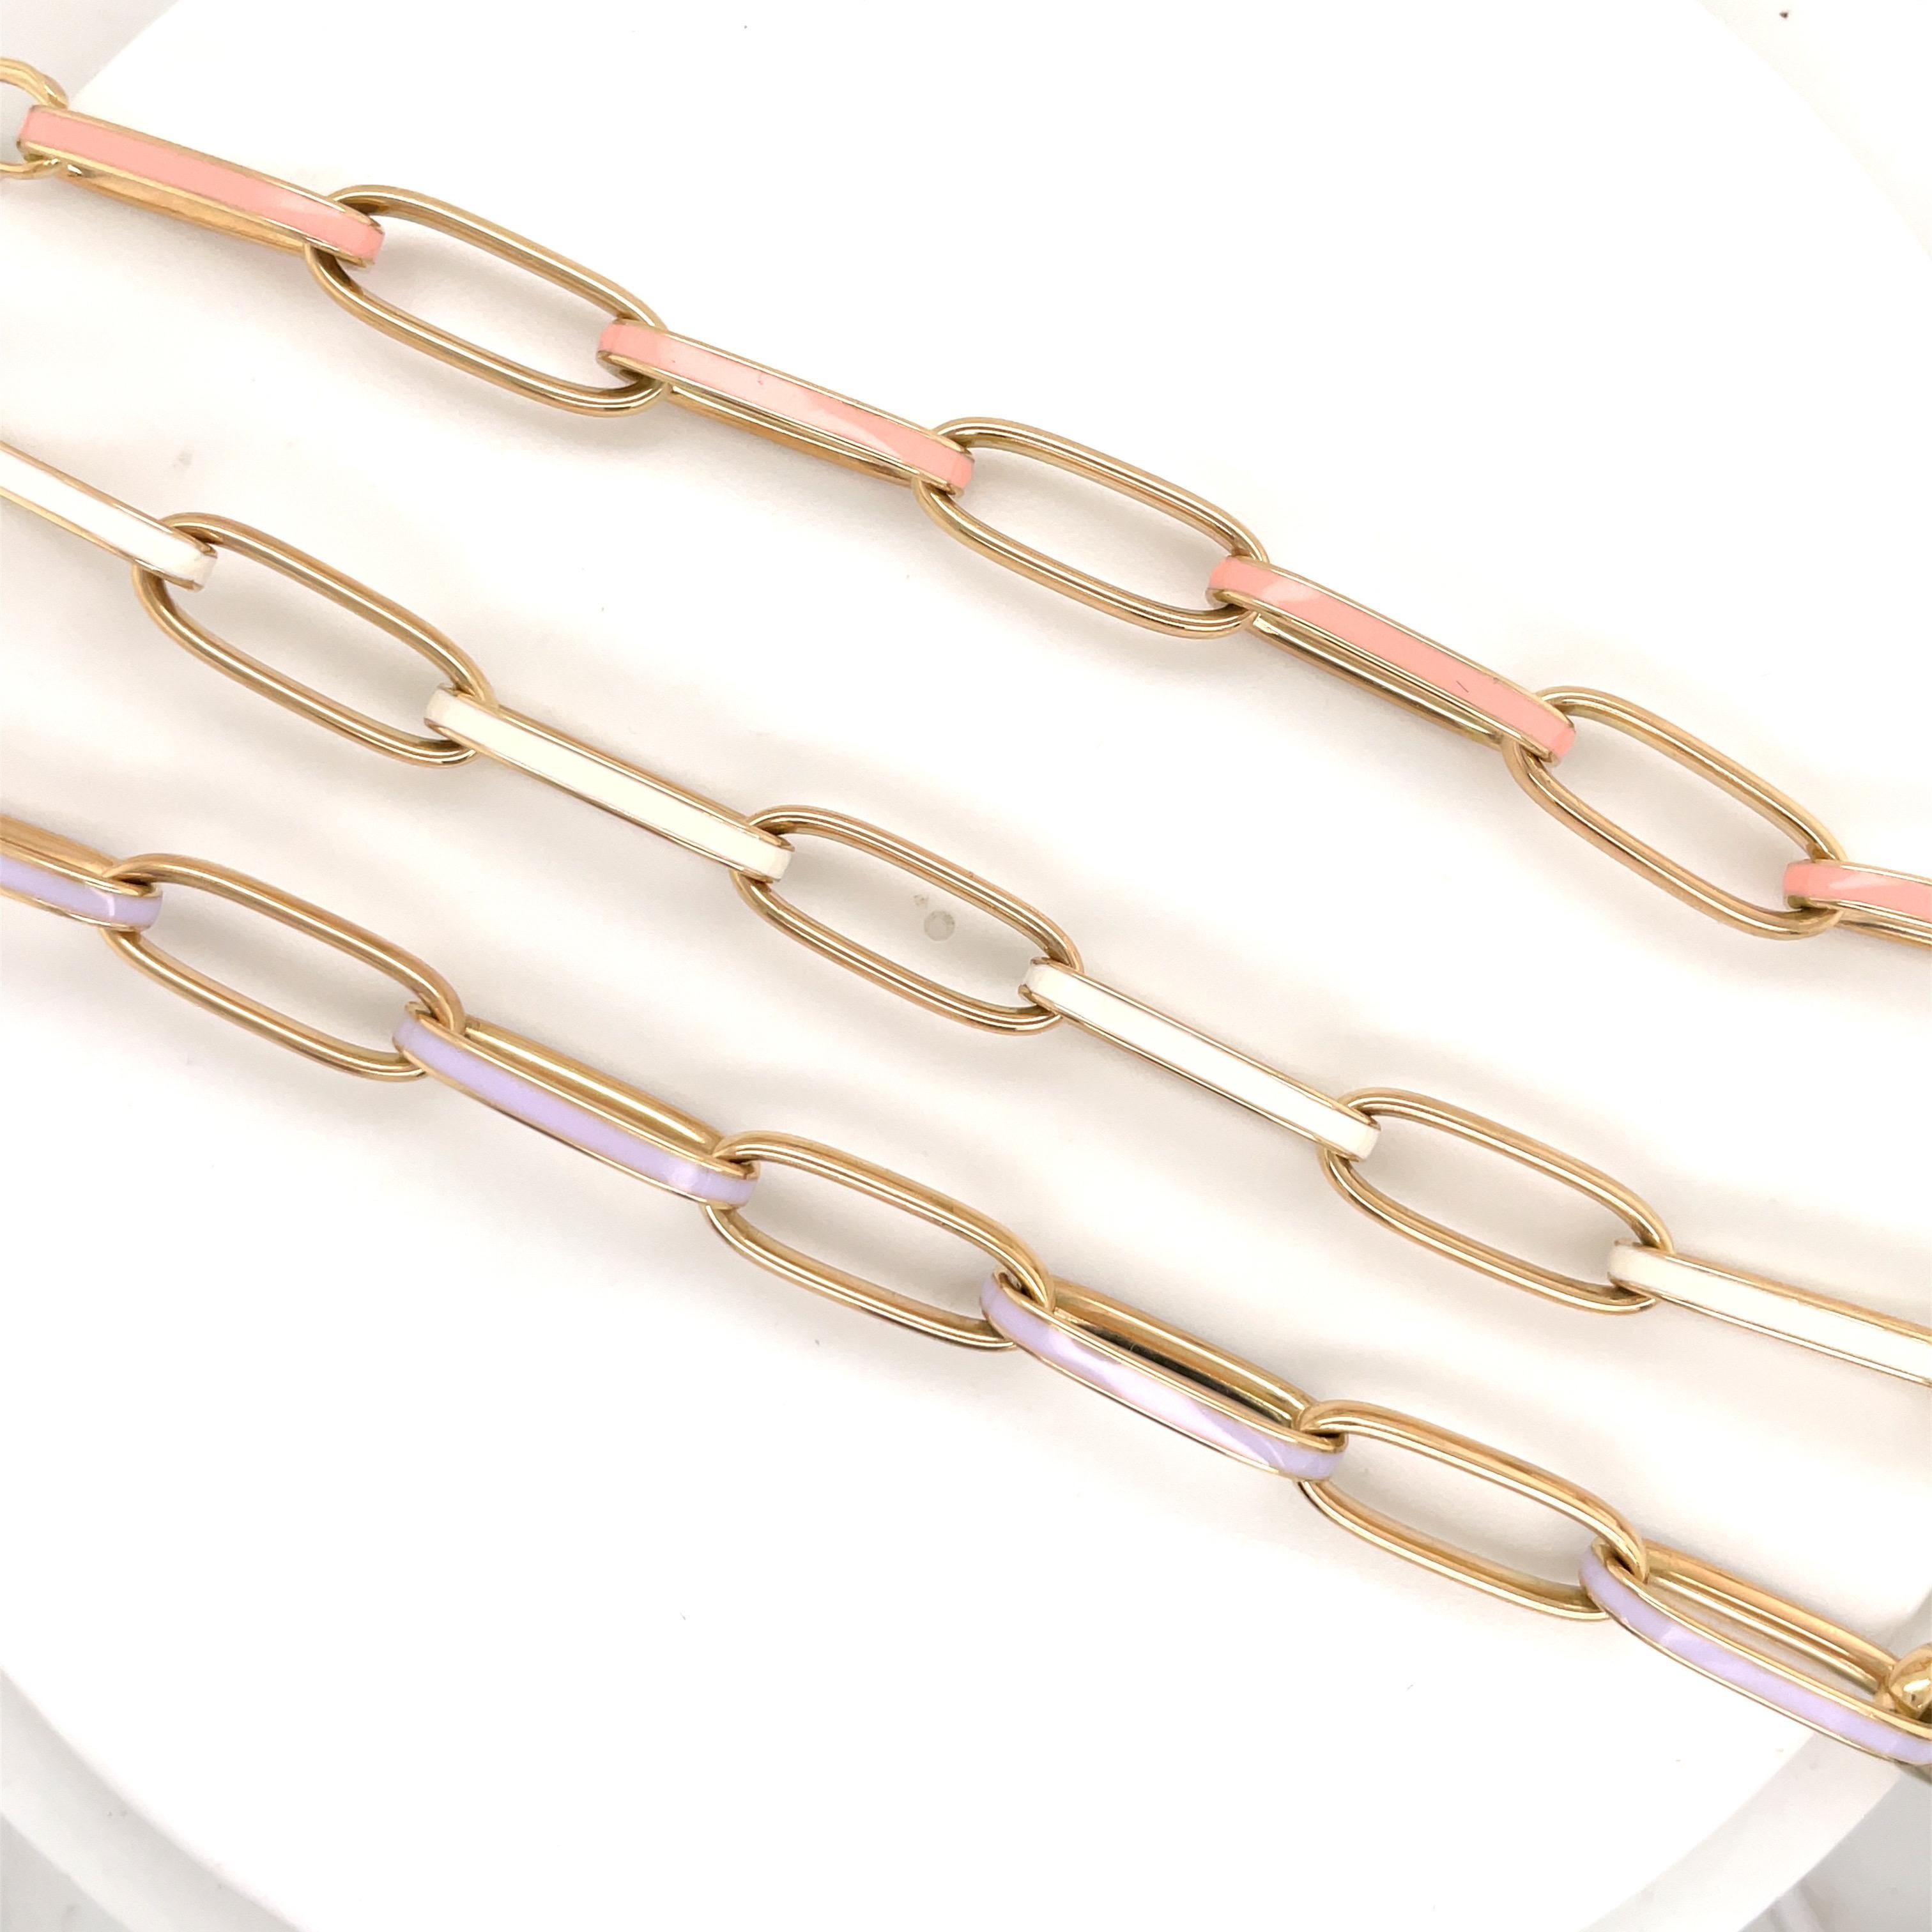 14 Karat Yellow Gold link bracelet featuring alternating enamel & gold links weighing 8.07 grams.
Available in Salmon, White & Purple.
Price shown is for individual bracelet.
DM for additional colors. 
More colors to come!